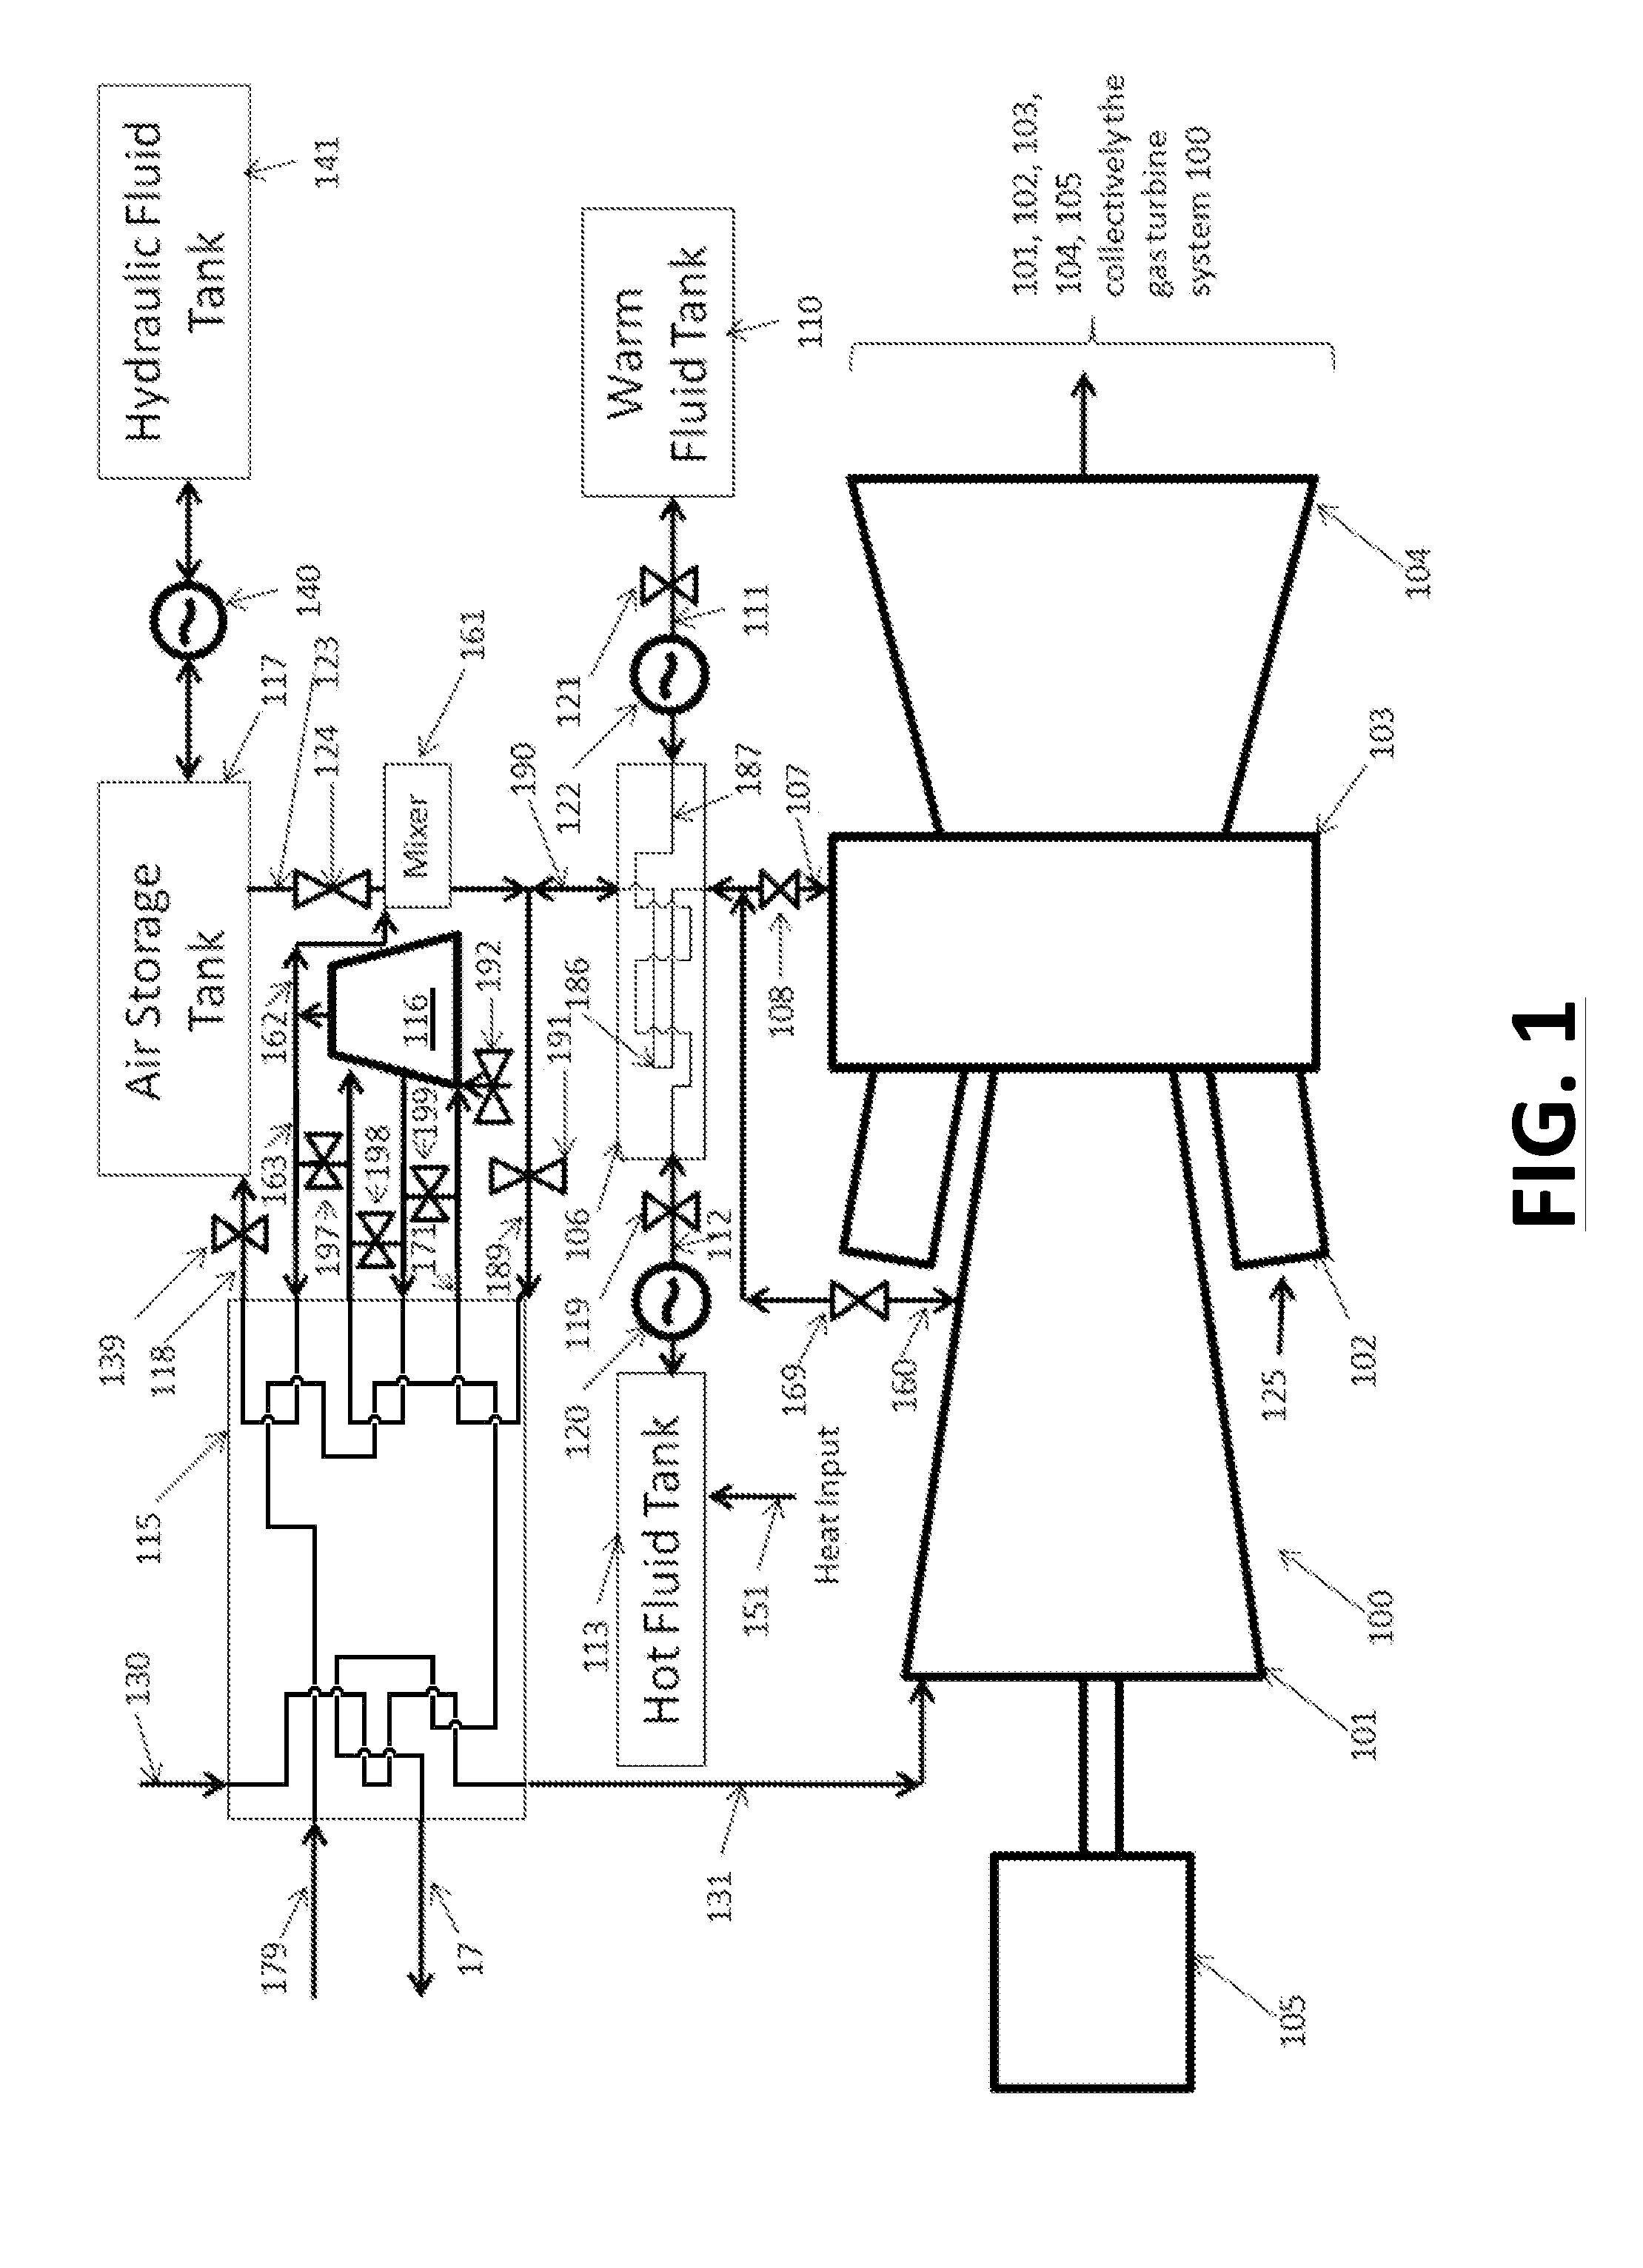 Gas Turbine Energy Storage and Energy Supplementing Systems And Methods of Making and Using the Same